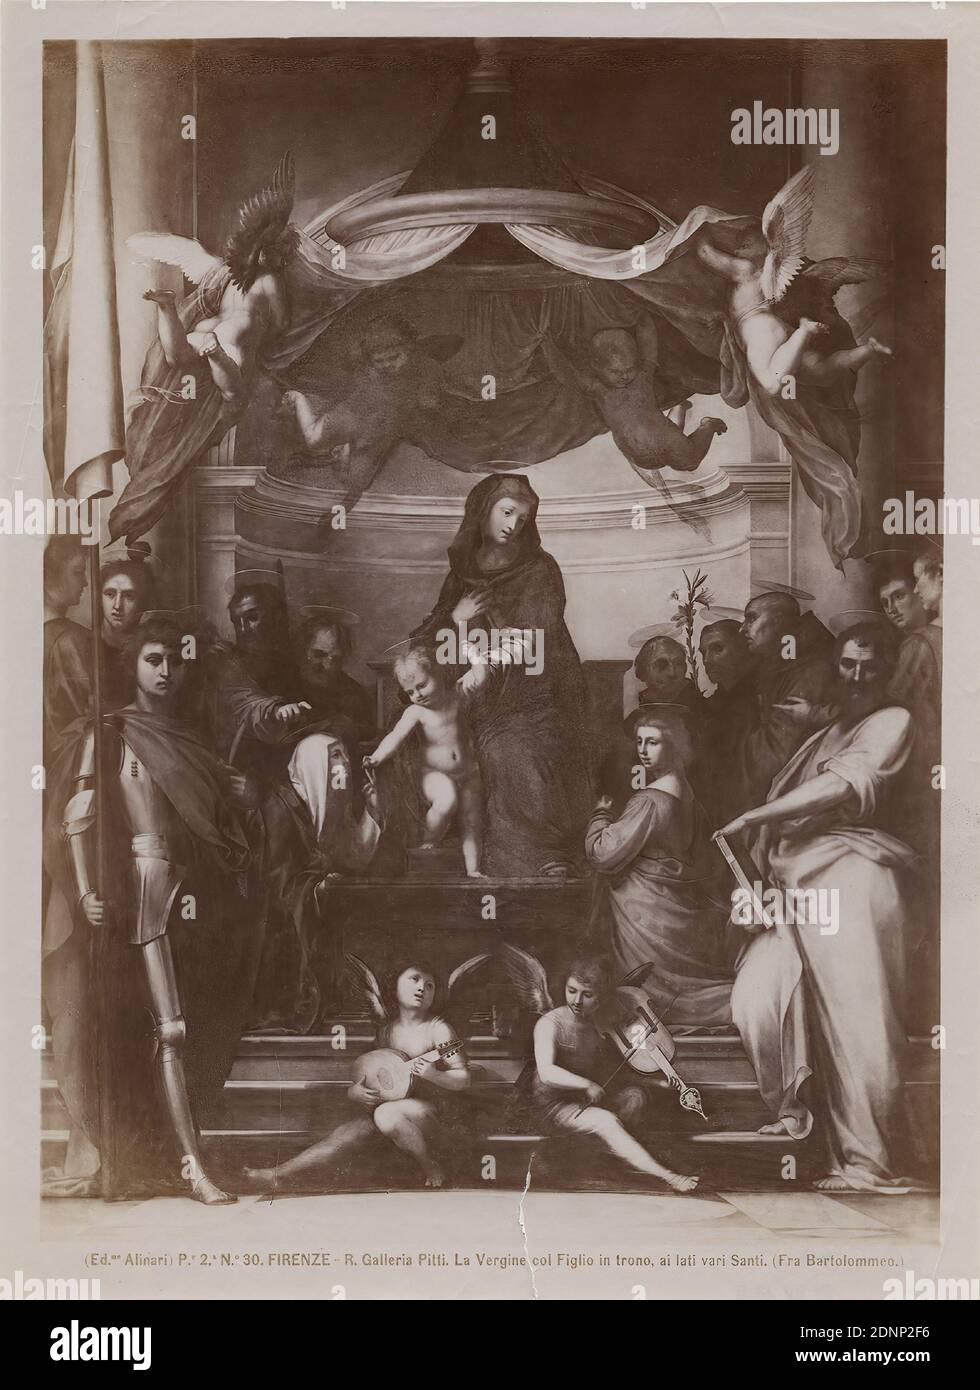 Fra Bartolommeo: Enthroned Mary with the Child and Saints, Galleria Palatina, Palazzo Pitti, Florence, albumin paper, black and white positive process, image size: height: 24.80 cm; width: 18.80 cm, FIRENZE - R. Galleria Pitti. La Vergine col Figlio in trono, ai lati vari Santi. (Fra Bartolommeo). Round stamp on verso, photography, painting, Madonna enthroned, Sacra Conversazione, angel (Christian religion Stock Photo